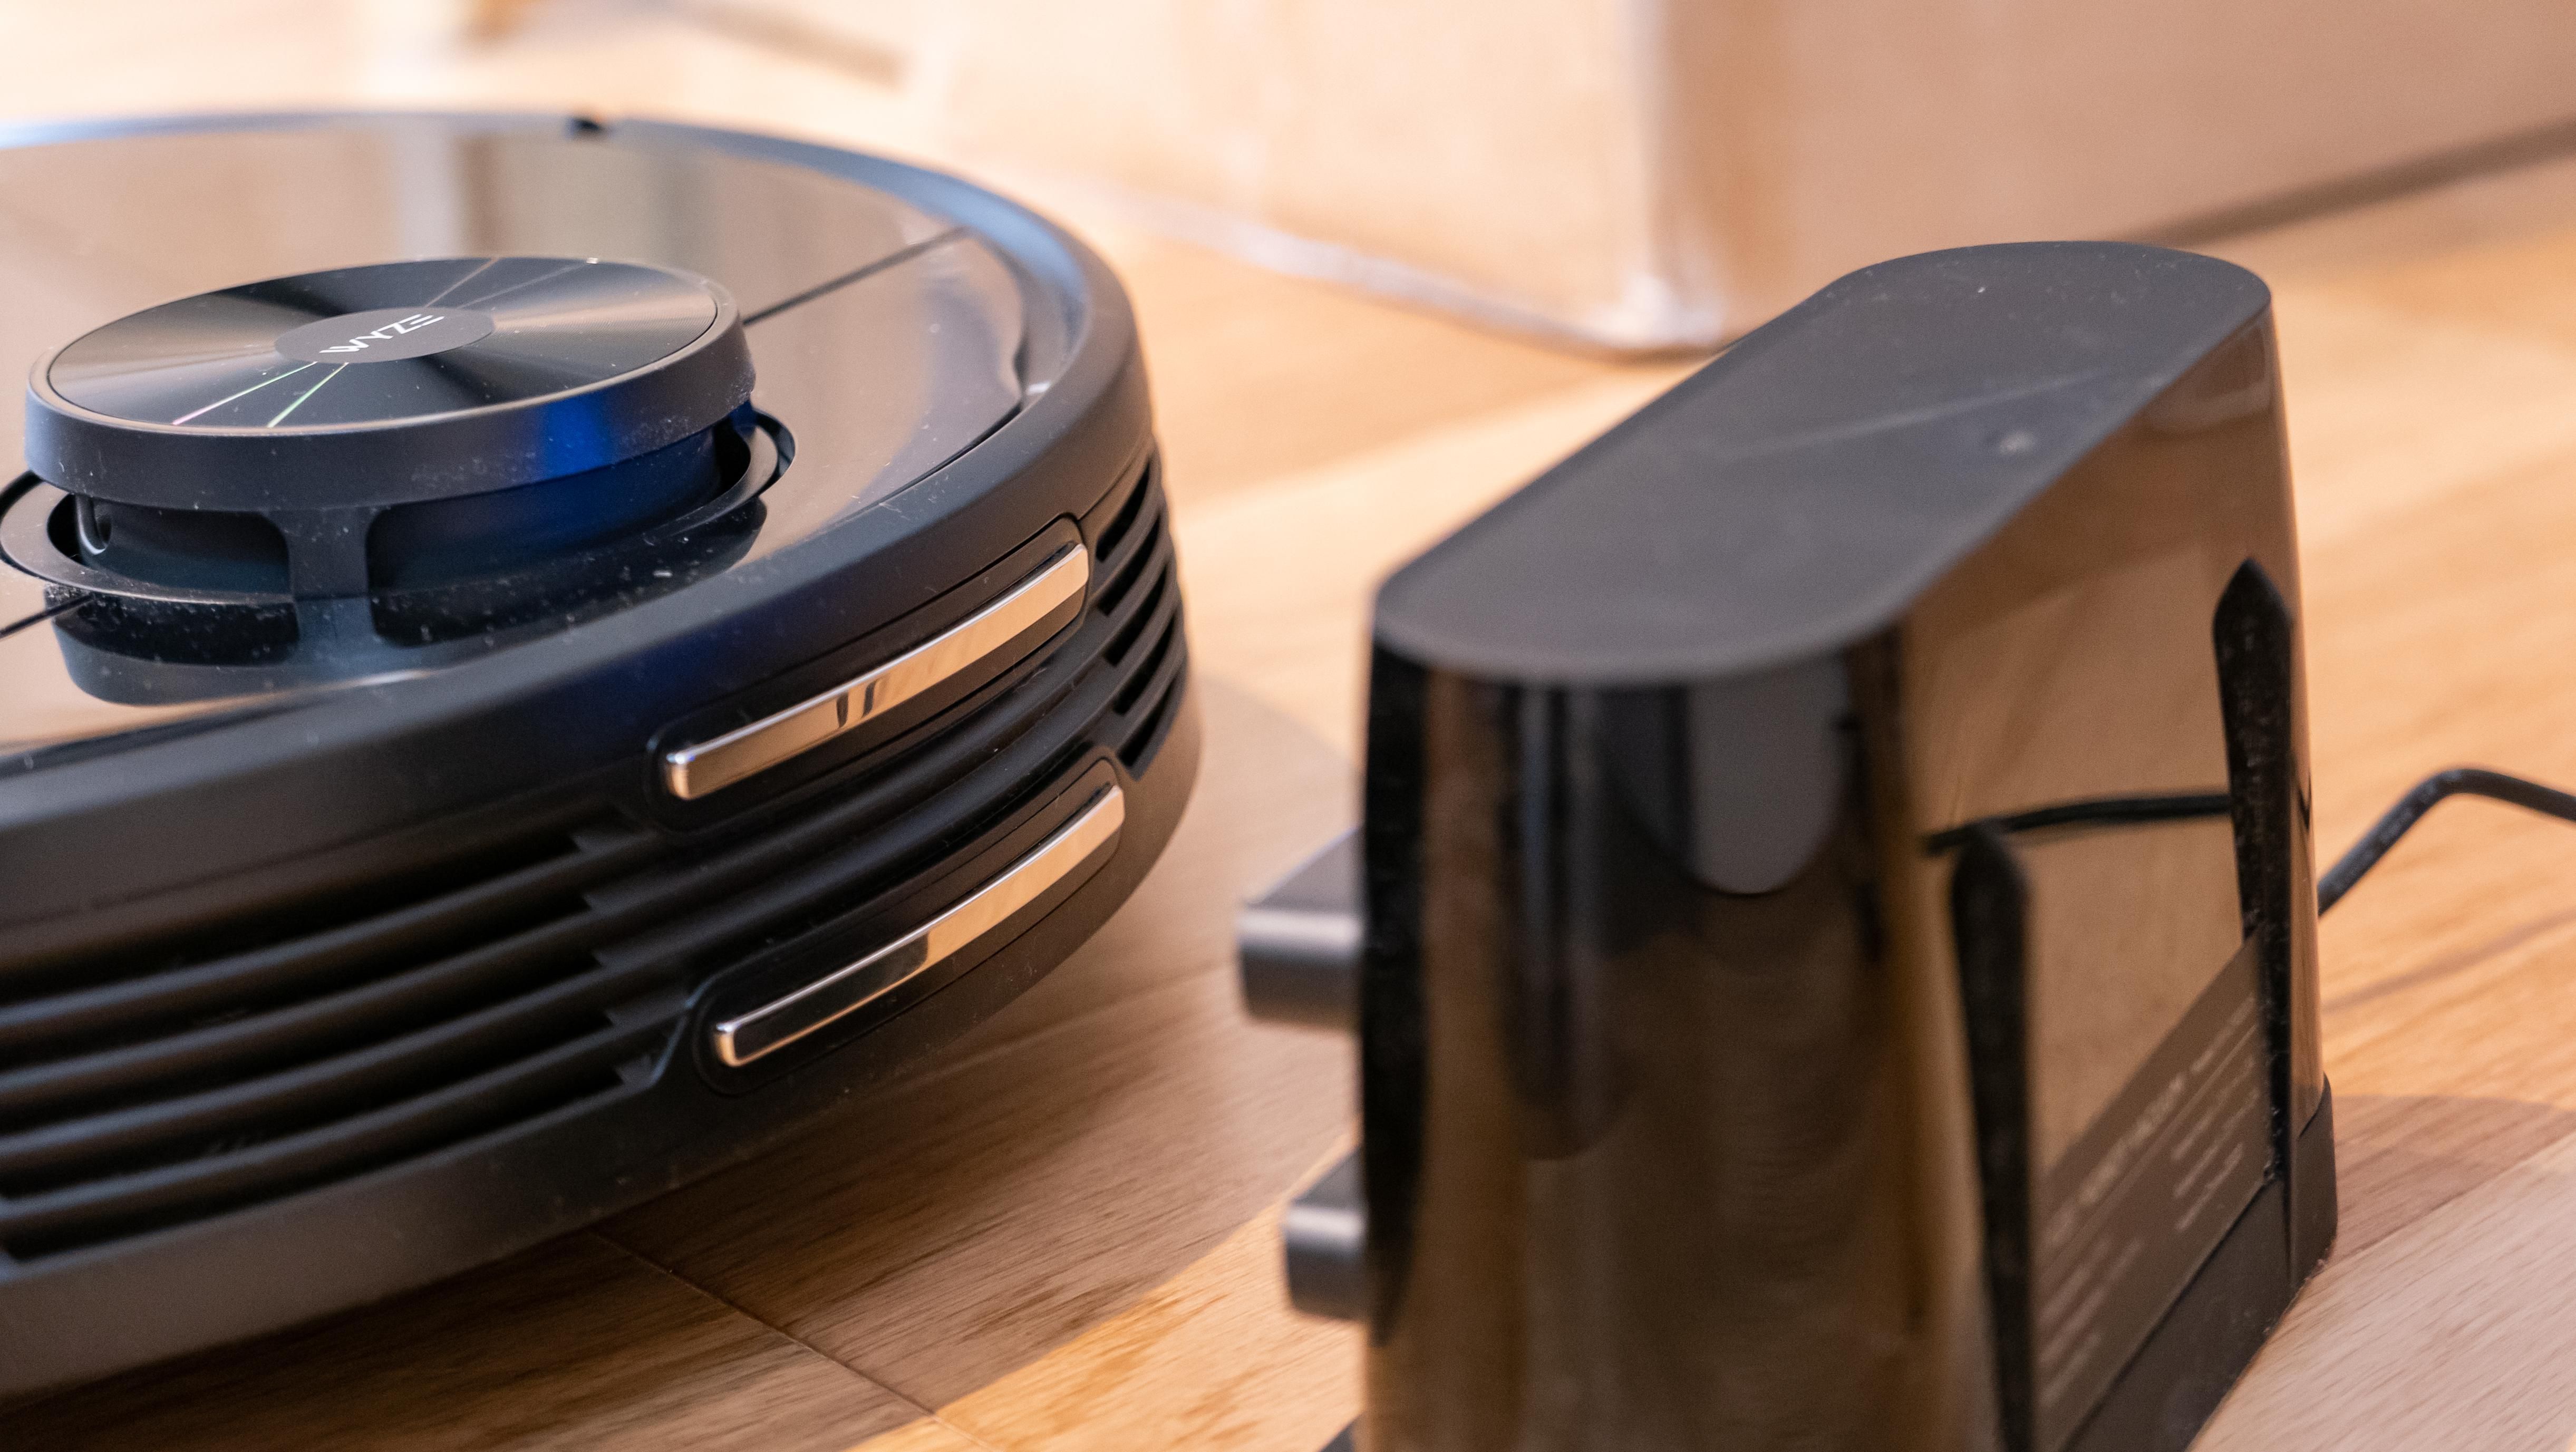 https://www.gearbrain.com/media-library/less-than-p-greater-than-robot-vacuums-can-be-picked-up-for-a-budget-price-here-are-7-options-less-than-p-greater-than.jpg?id=25847152